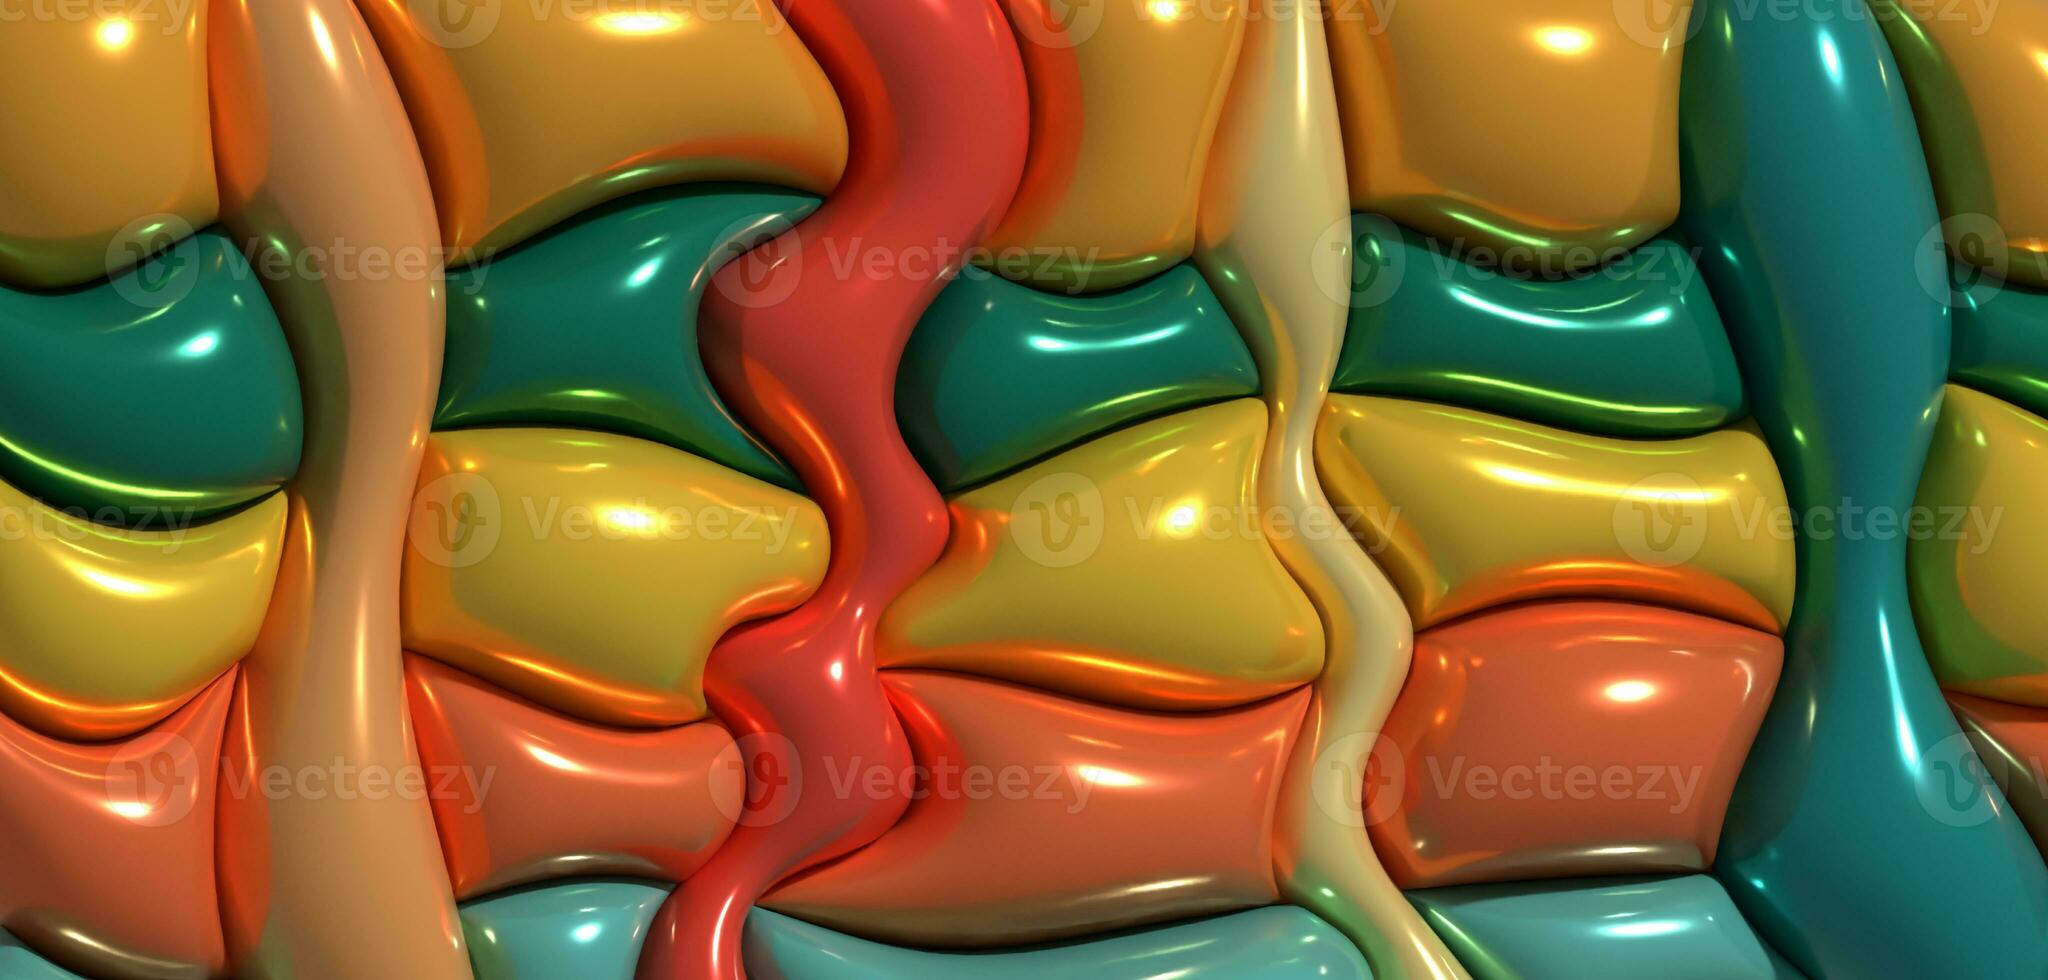 Abstract background with wavy shapes, 3D rendering illustration photo